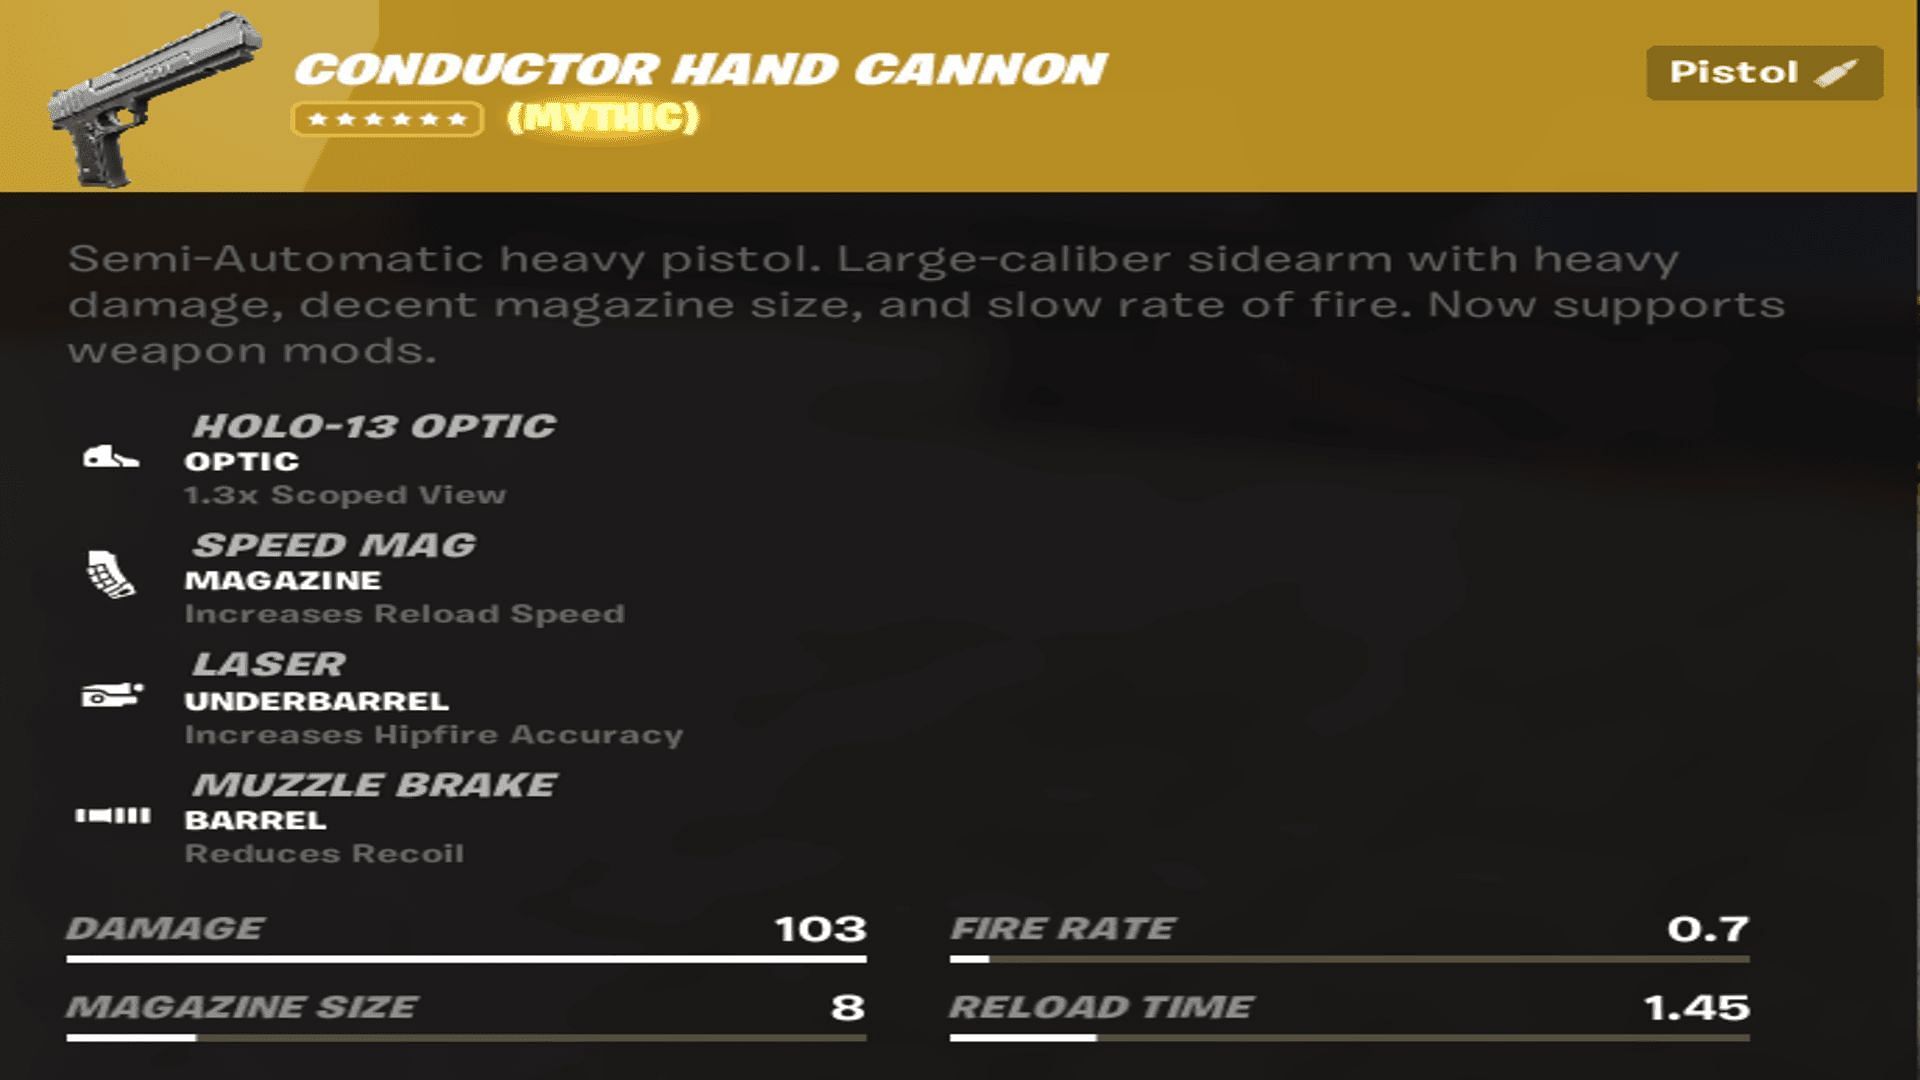 The Mythic Conductor Hand Cannon is one of the most powerful pistols right now (Image via Epic Games)